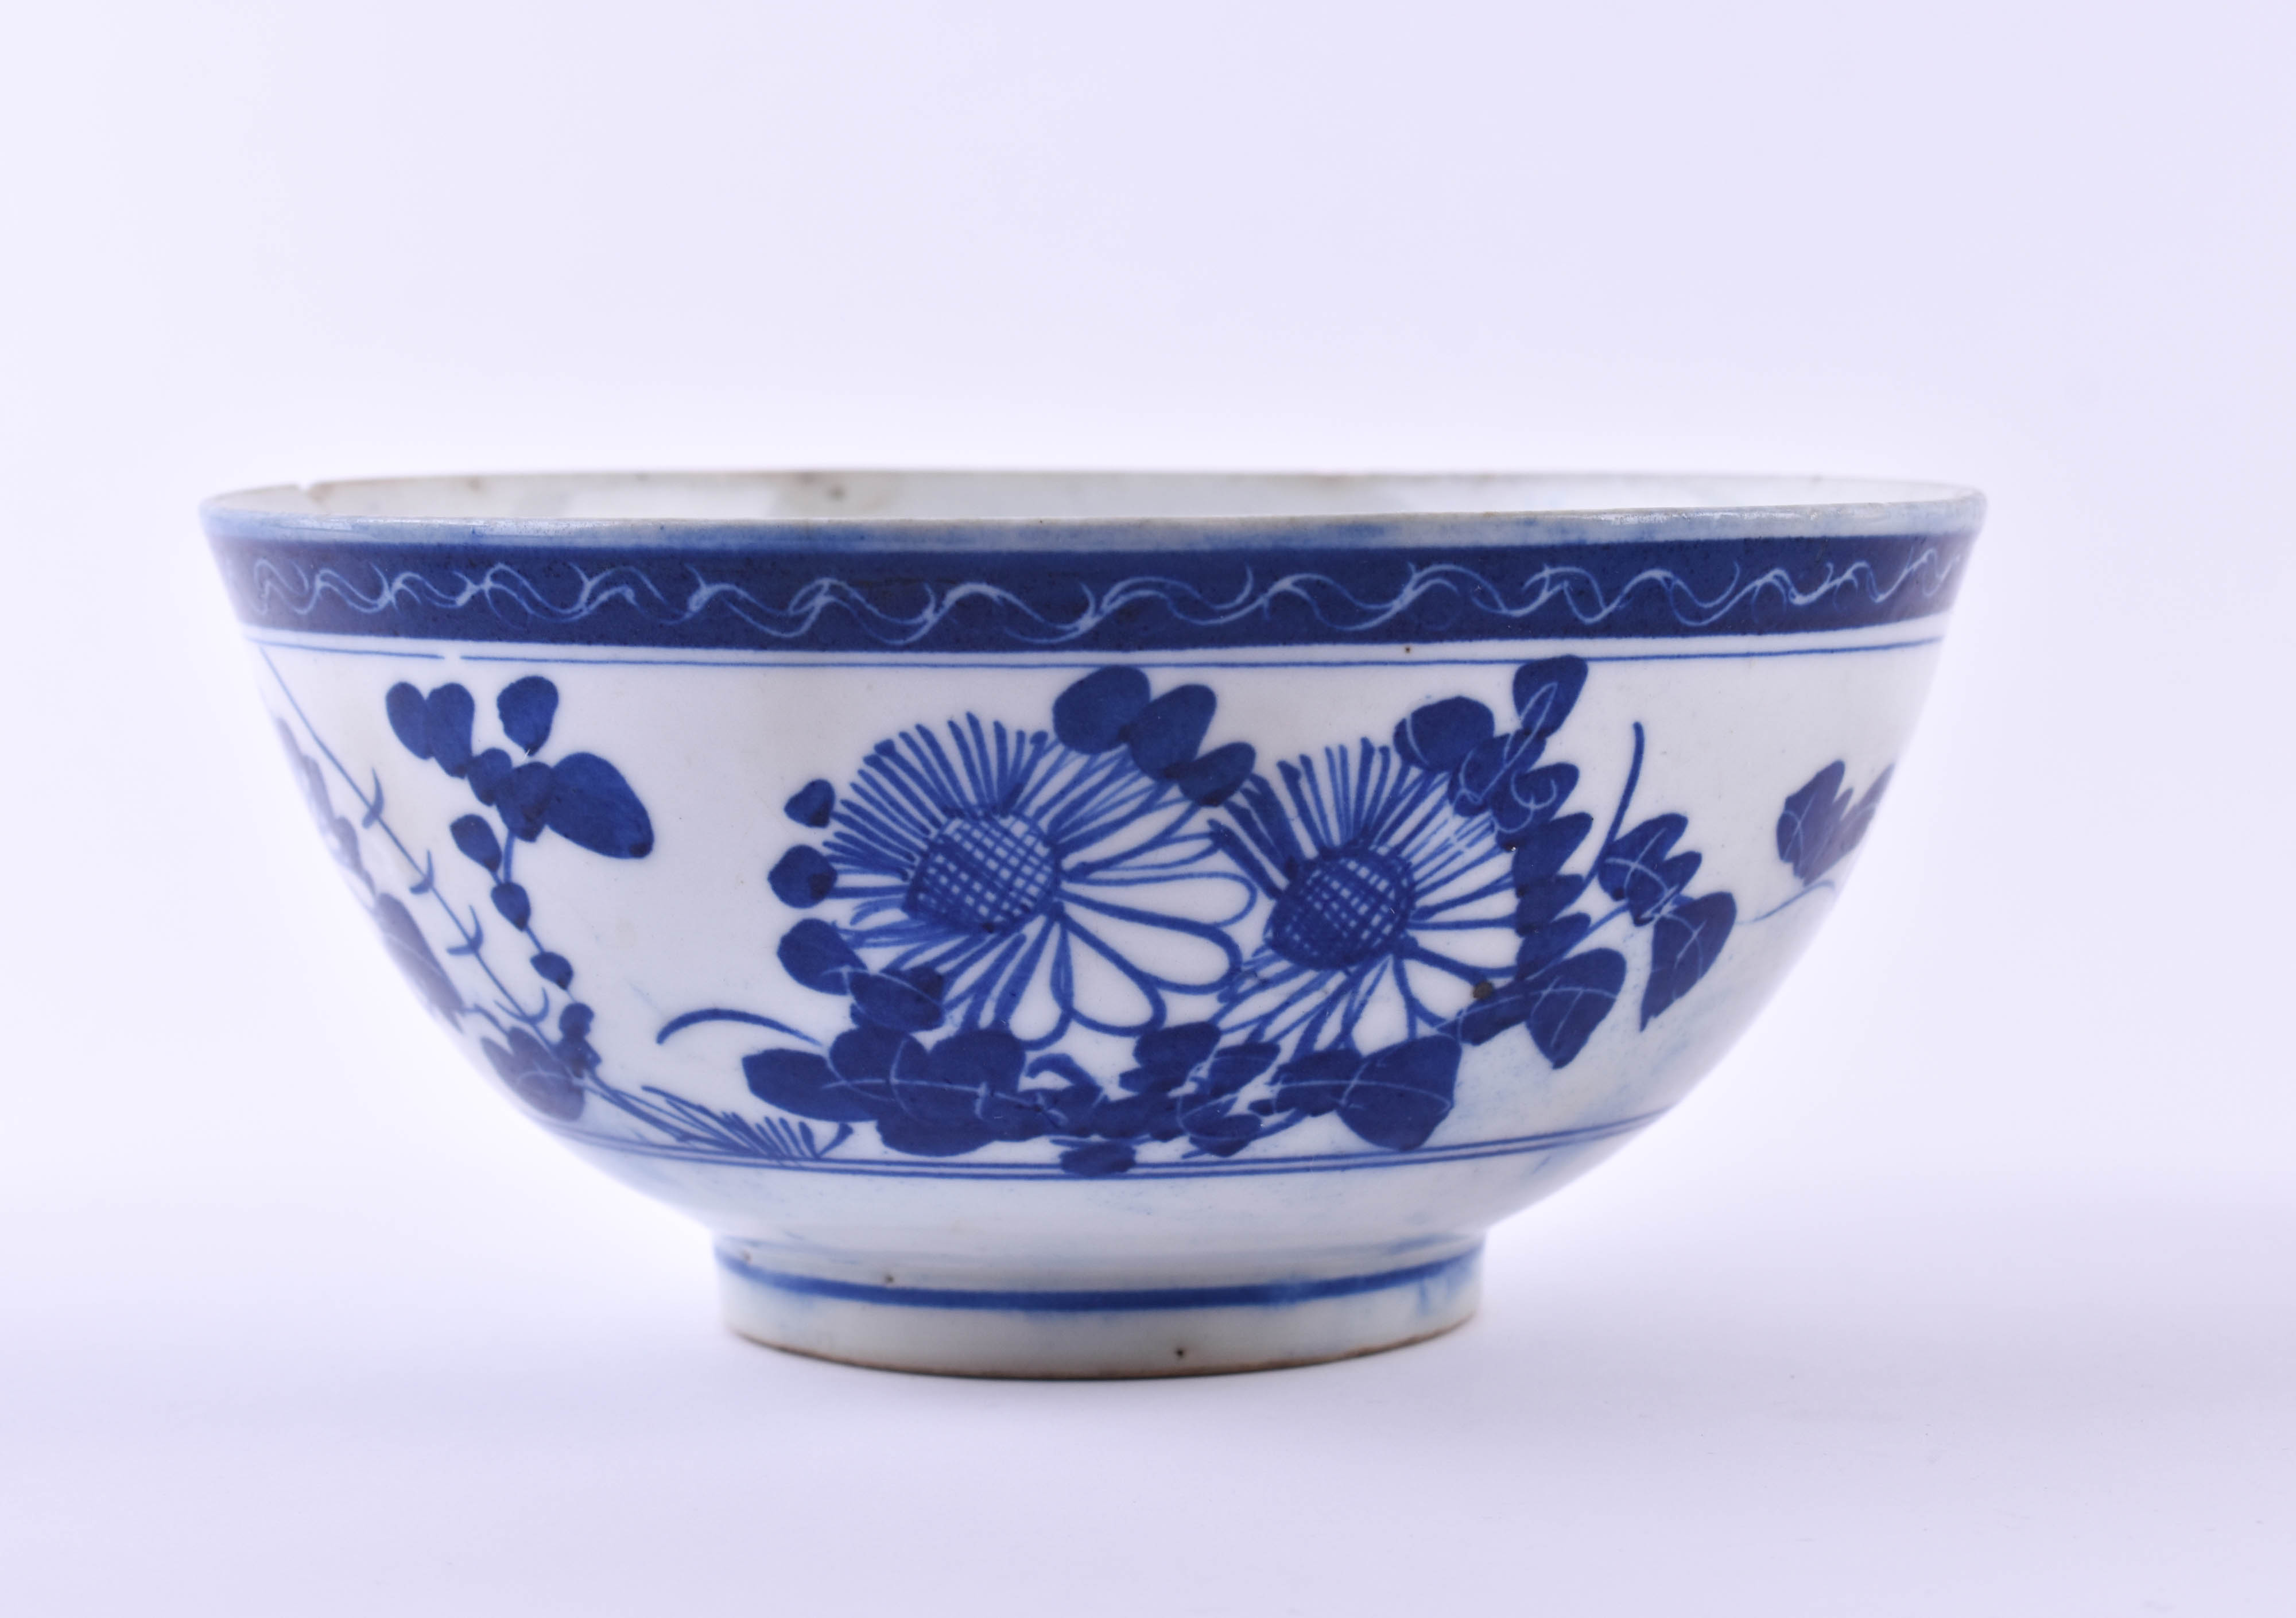  A group of Asian porcelain China Qing dynasty - Image 3 of 12